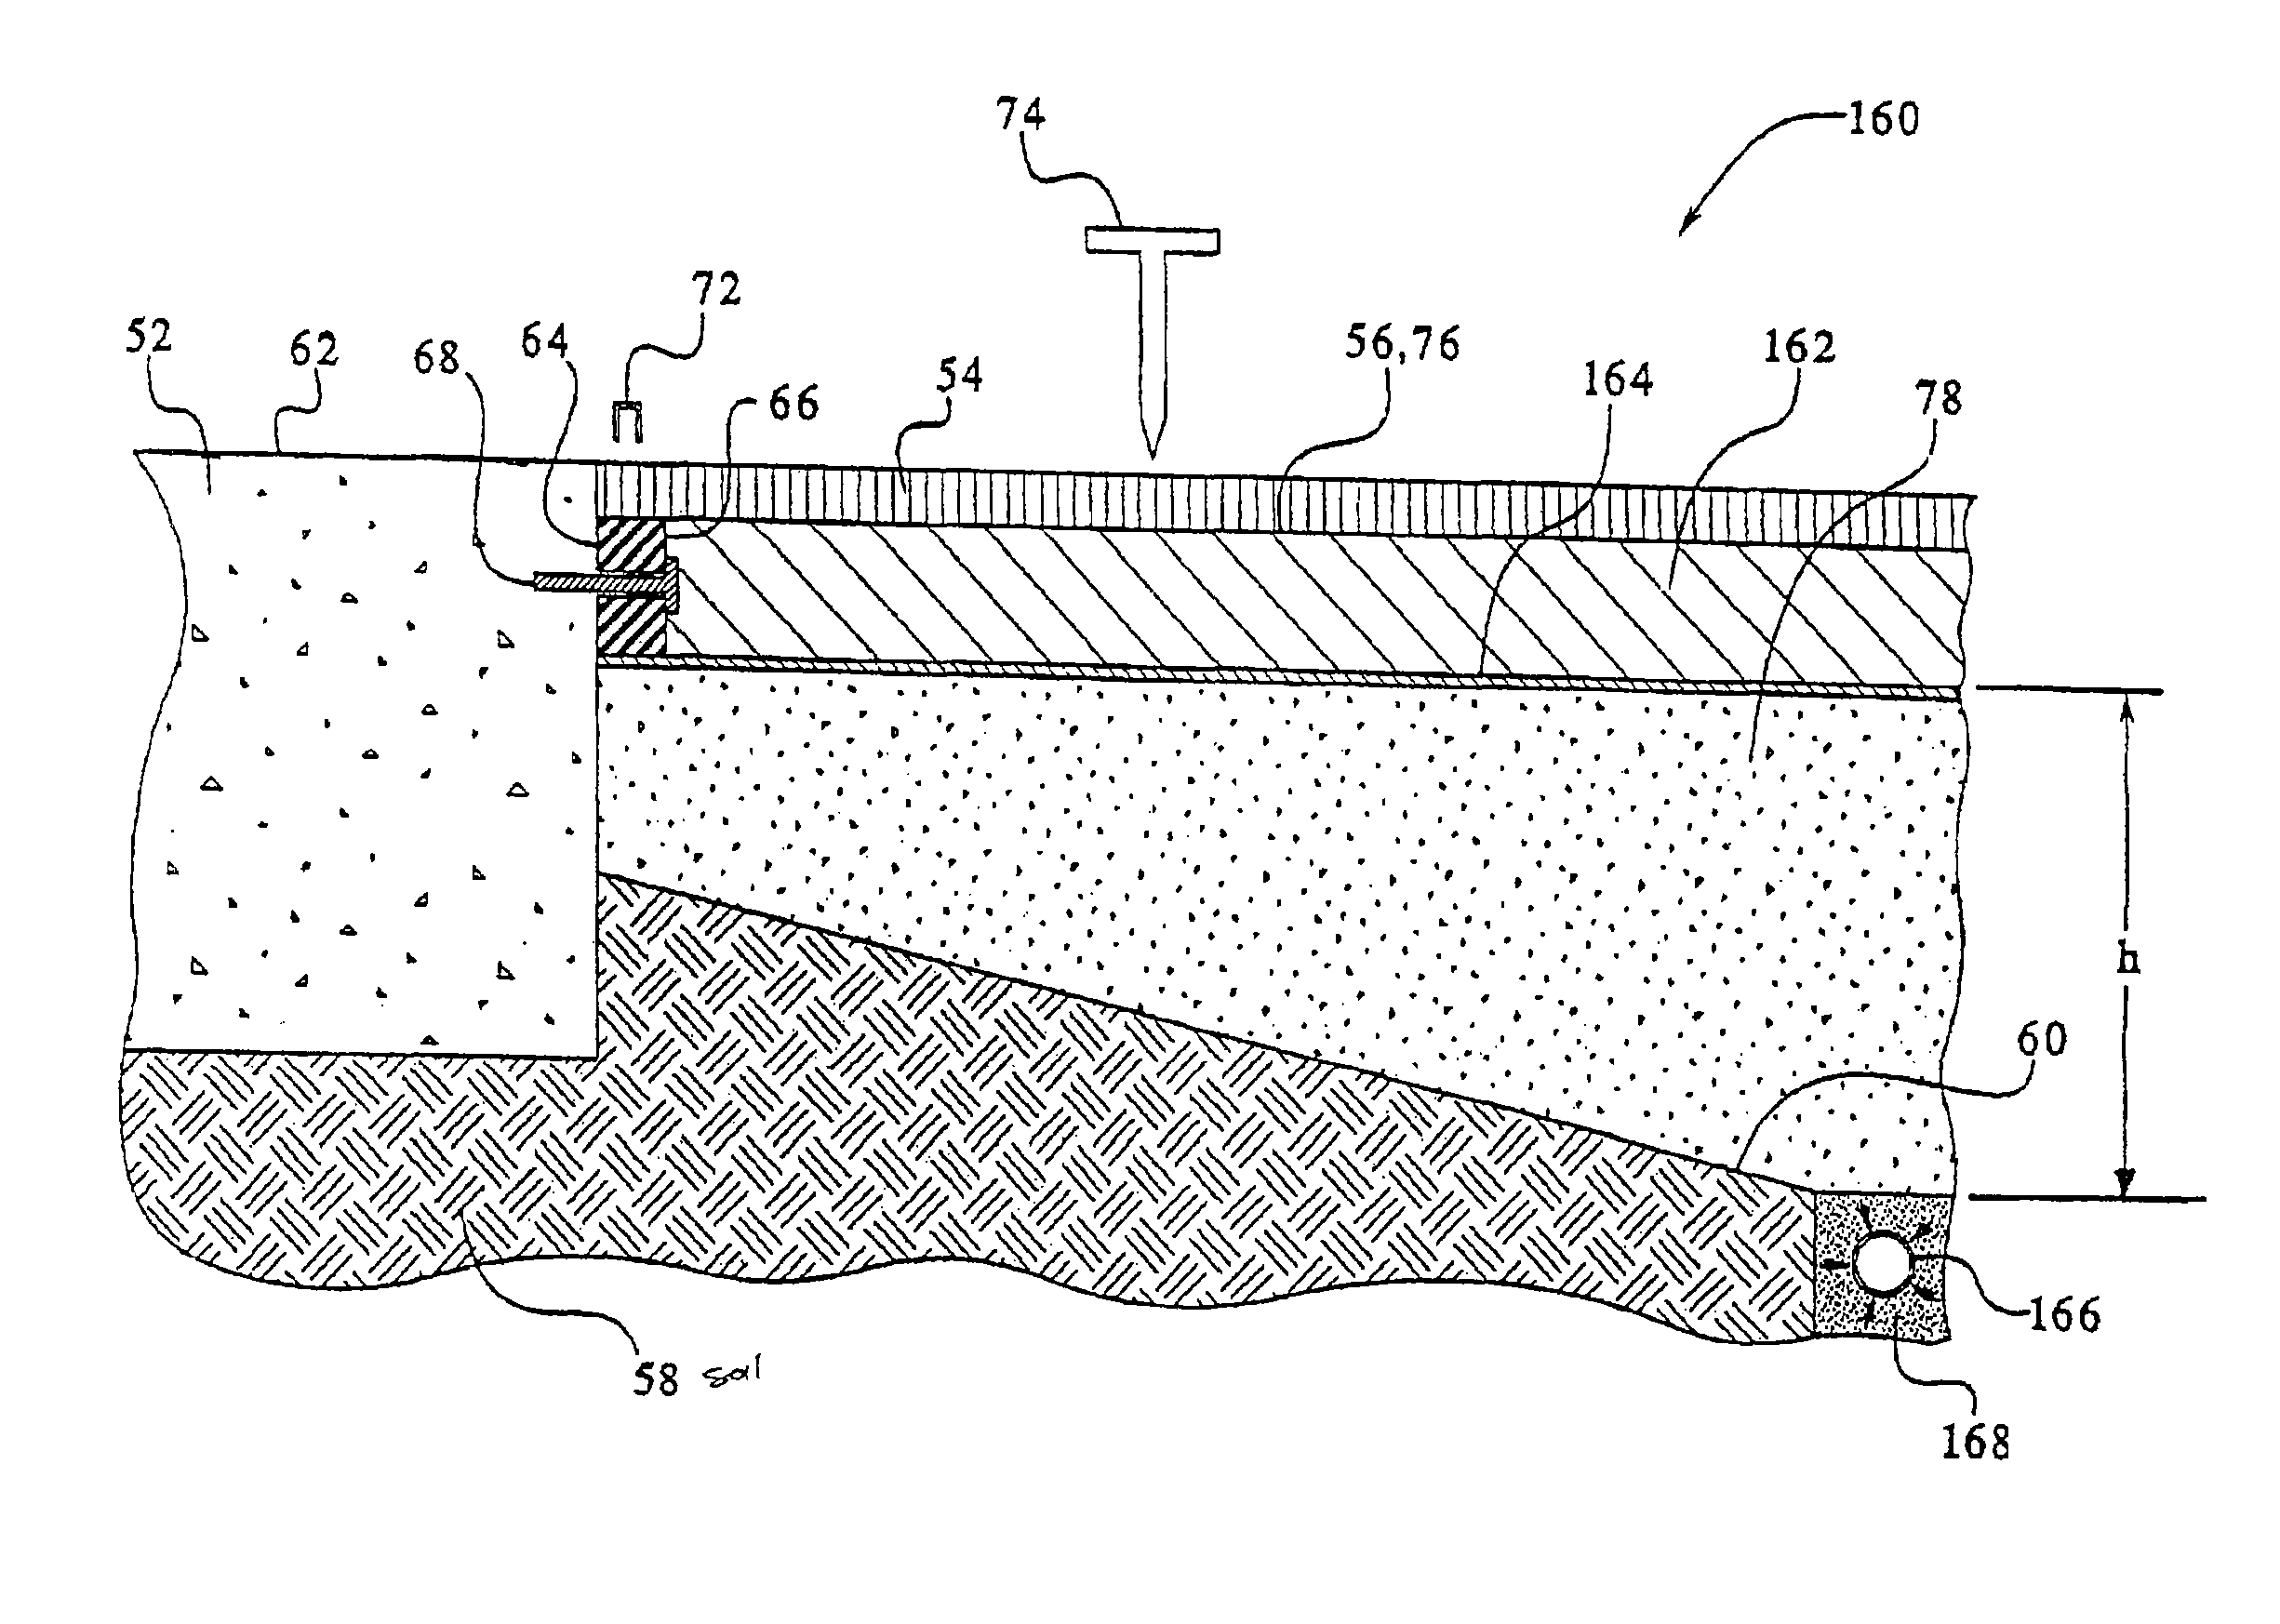 Arrester bed system and method for airports and airfields